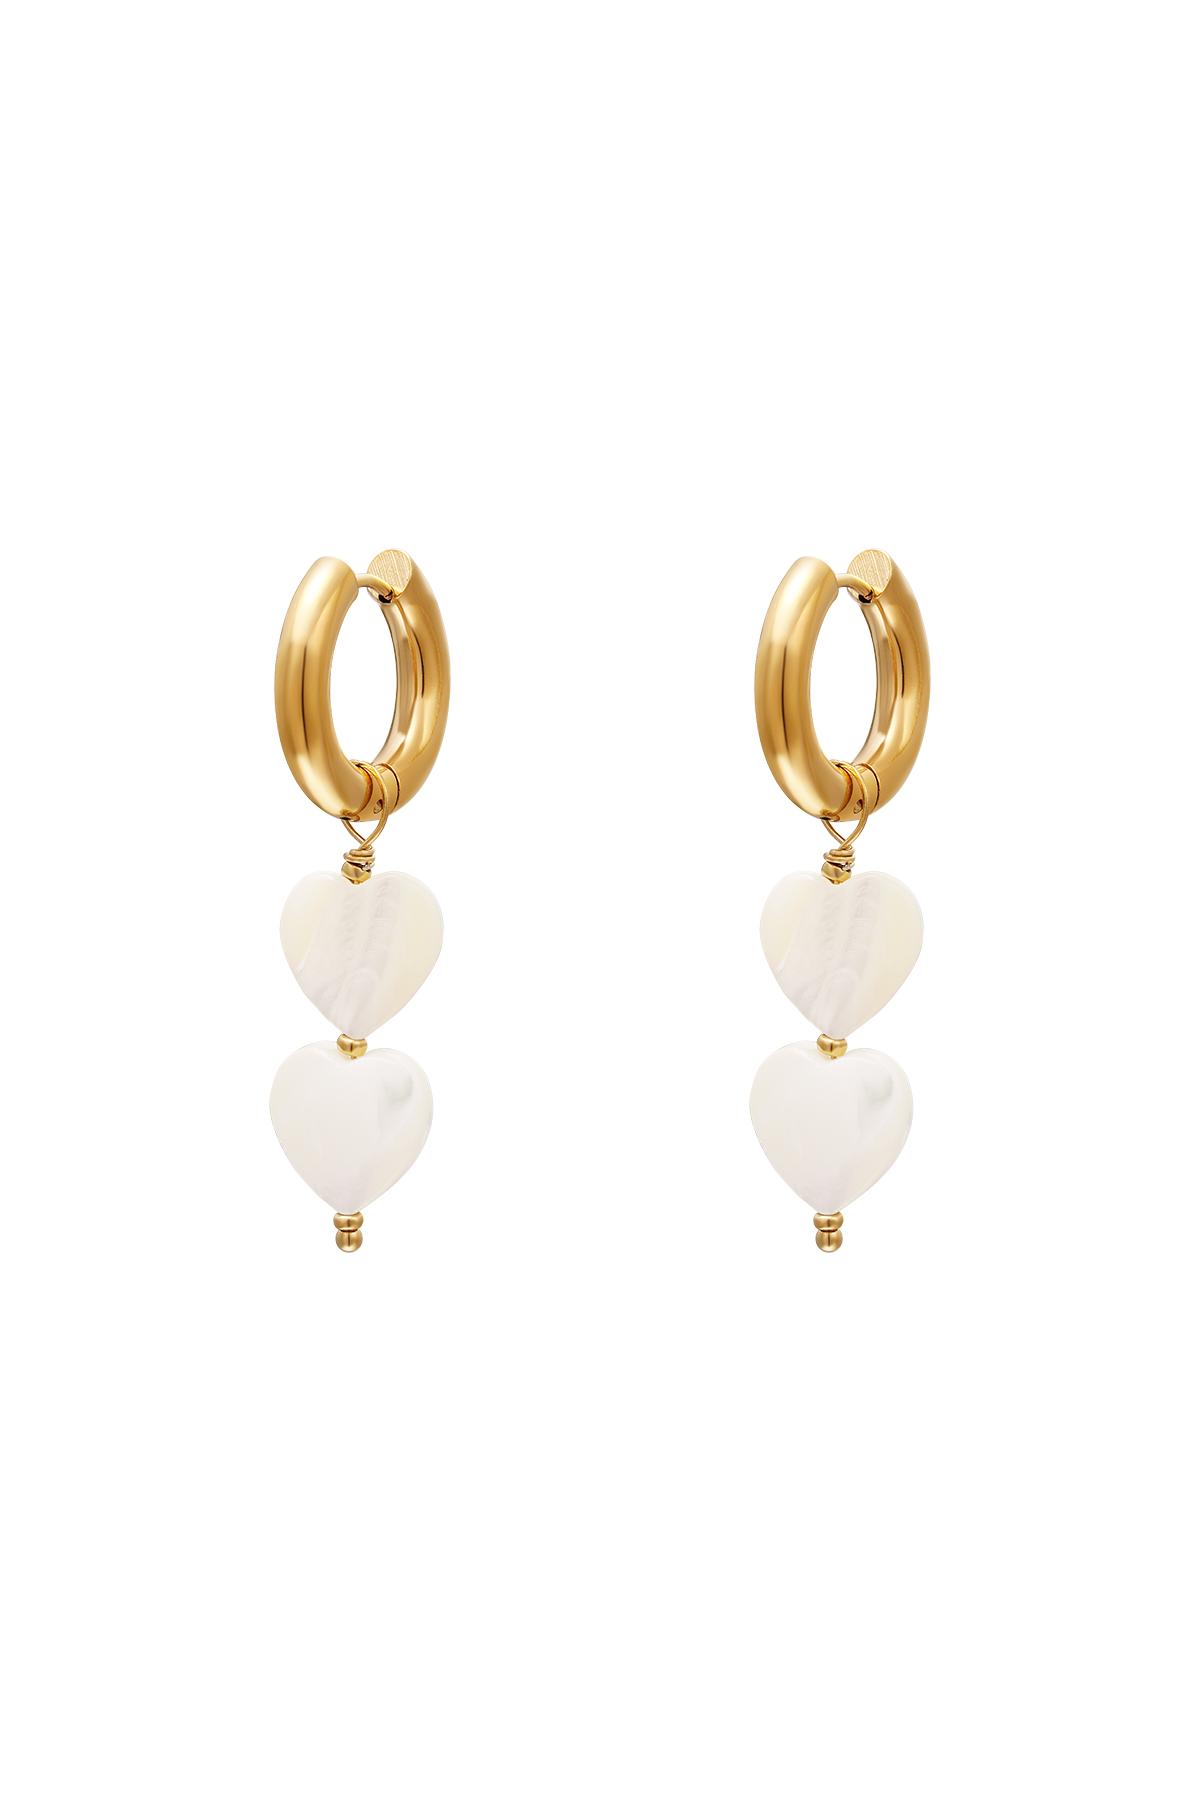 Pearl hearts earrings - #summergirls collection White gold Sea Shells h5 